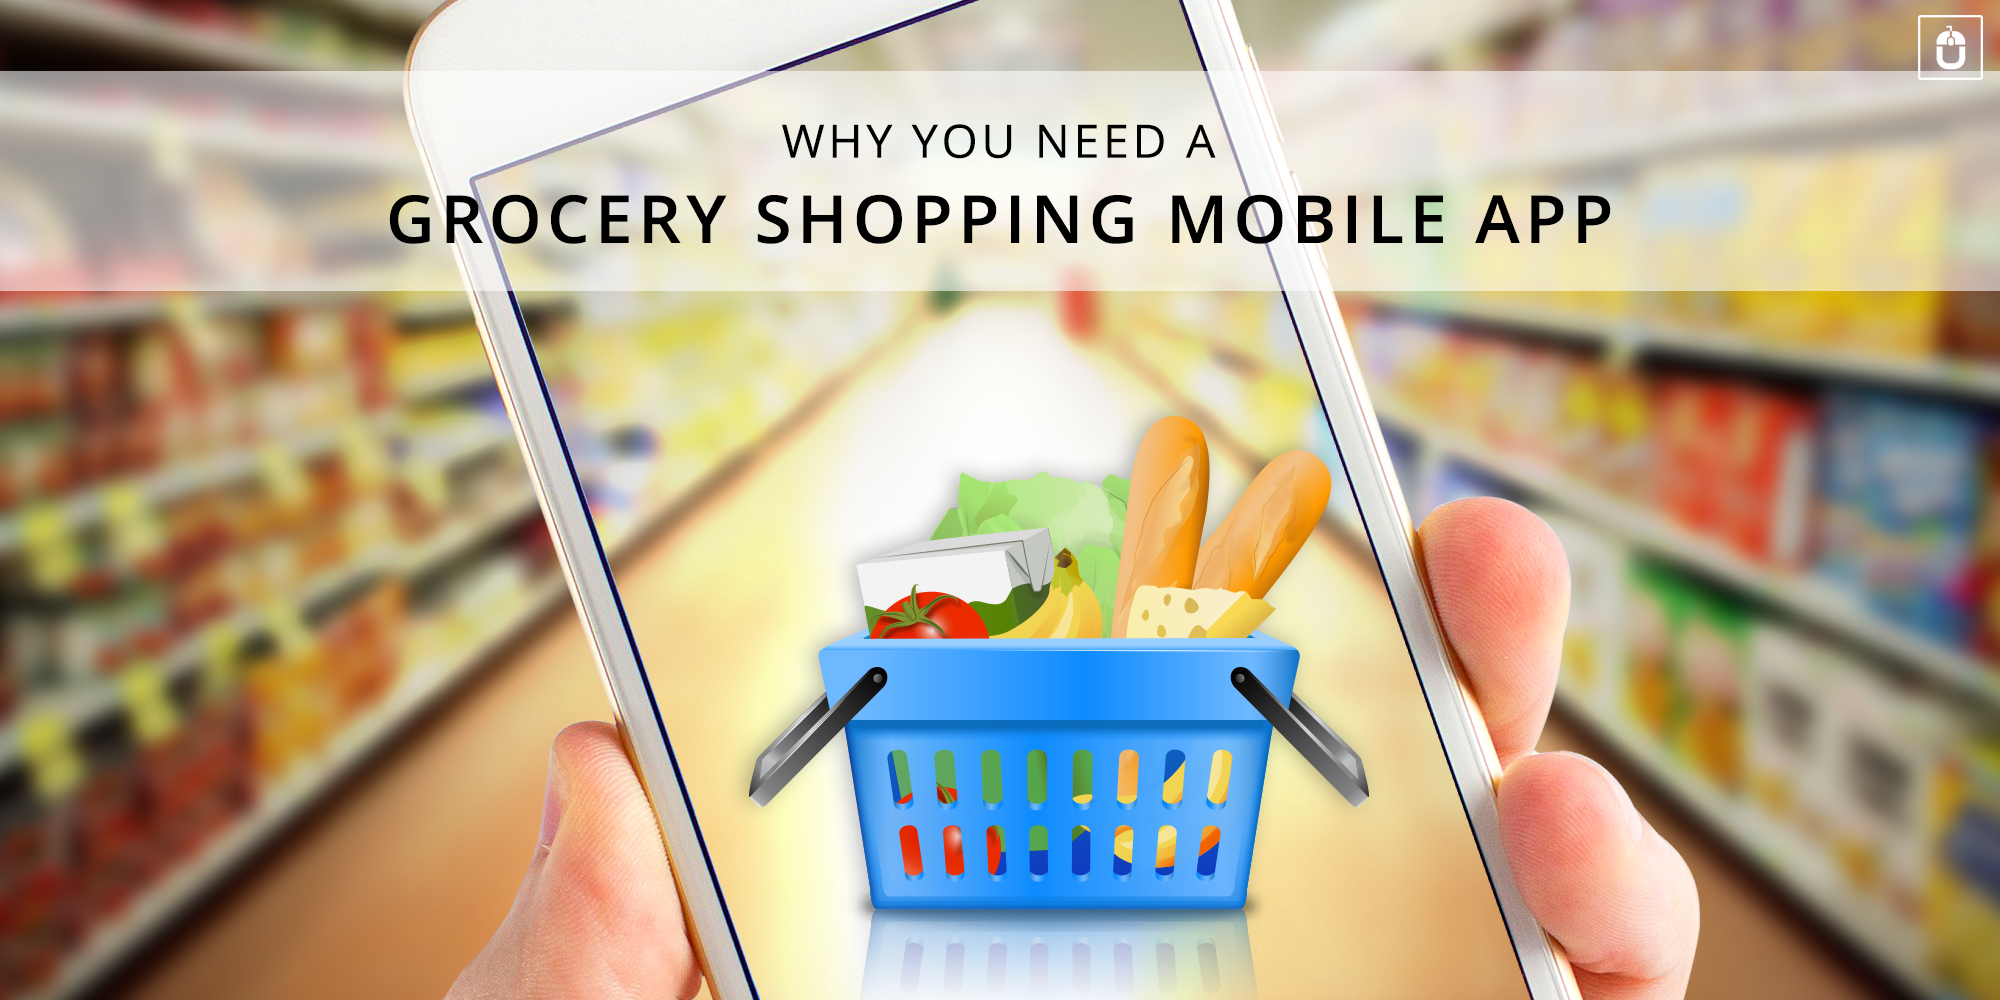 WHY YOU NEED A GROCERY SHOPPING MOBILE APP